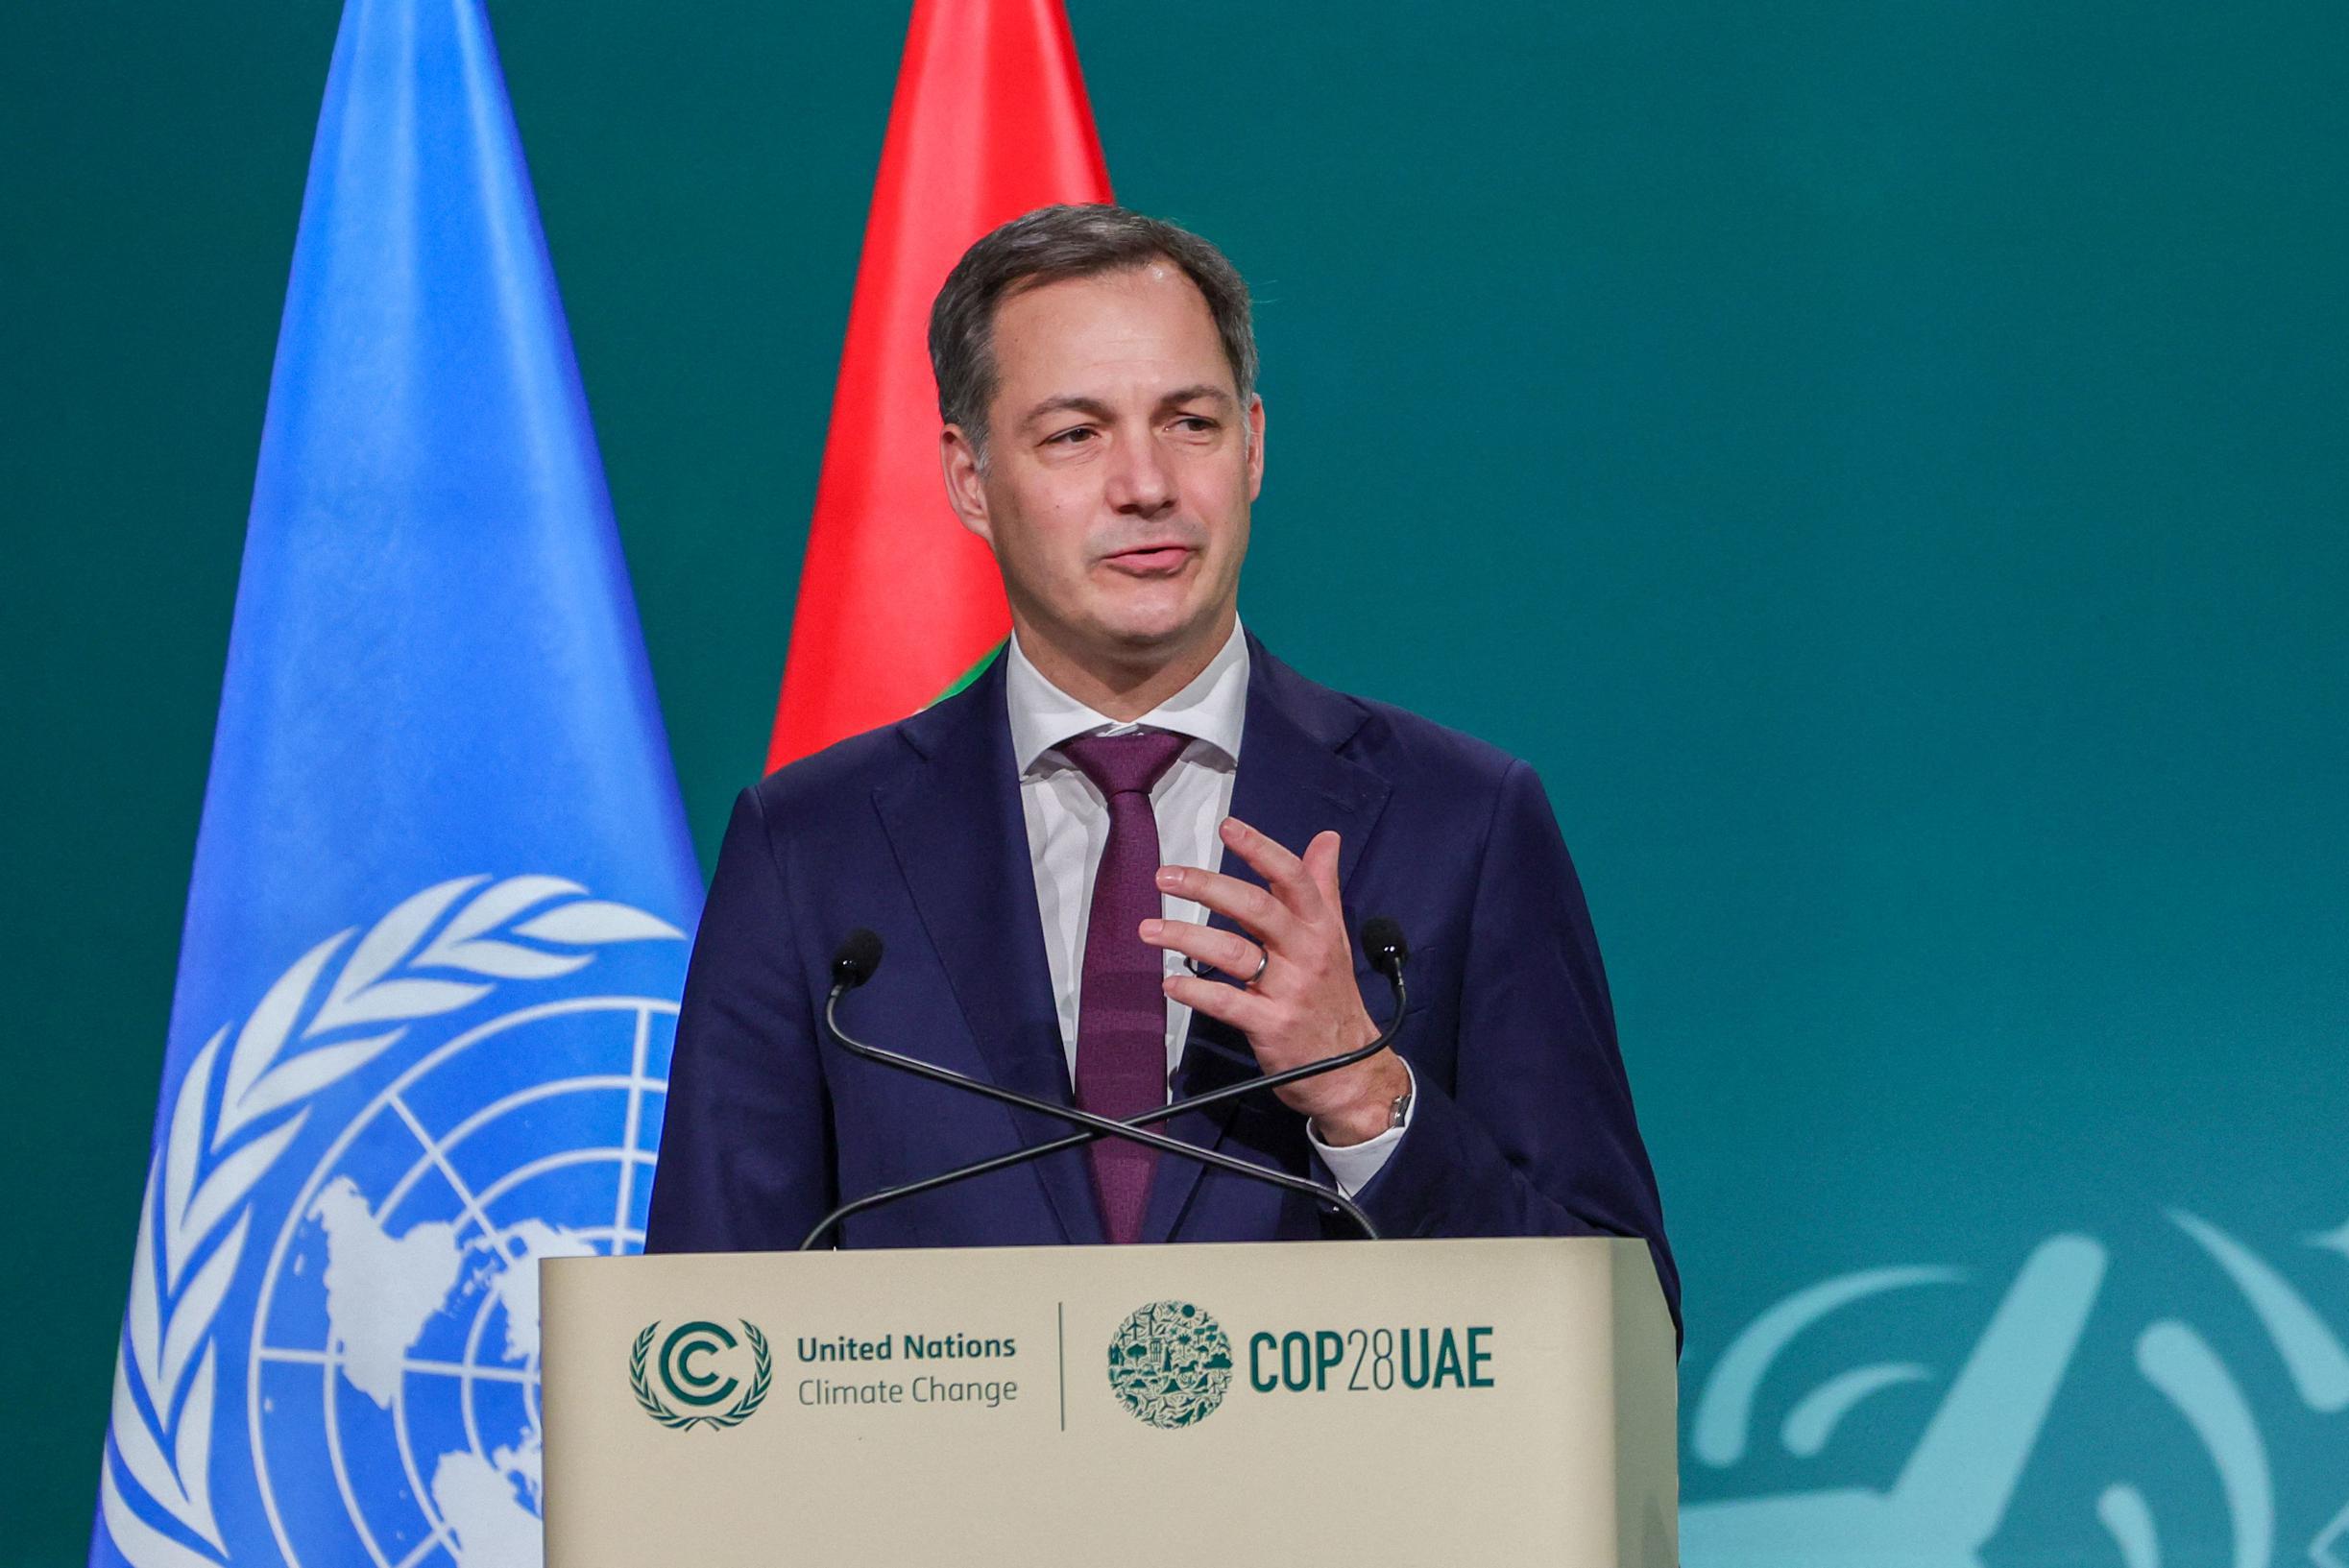 Prime Minister De Croo Urges Climate Summit to Move from Words to Actions